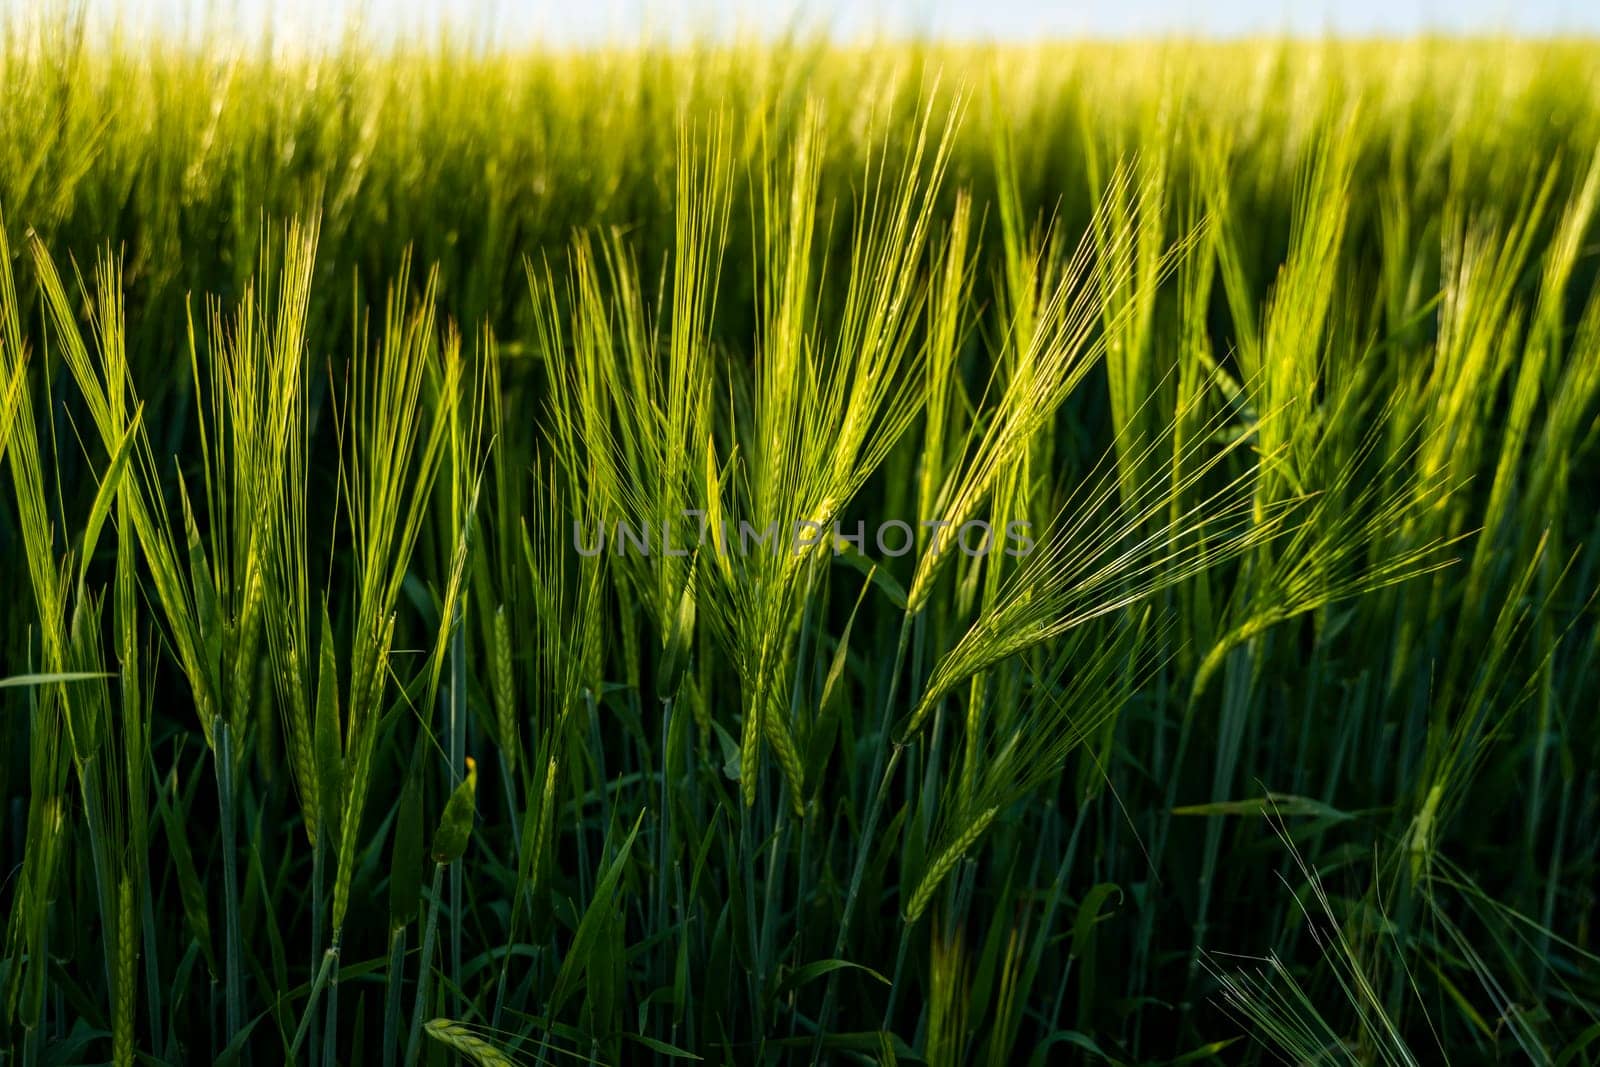 Young barley ears illuminated by sunlight. Concept of a good harvest in an agricultural field